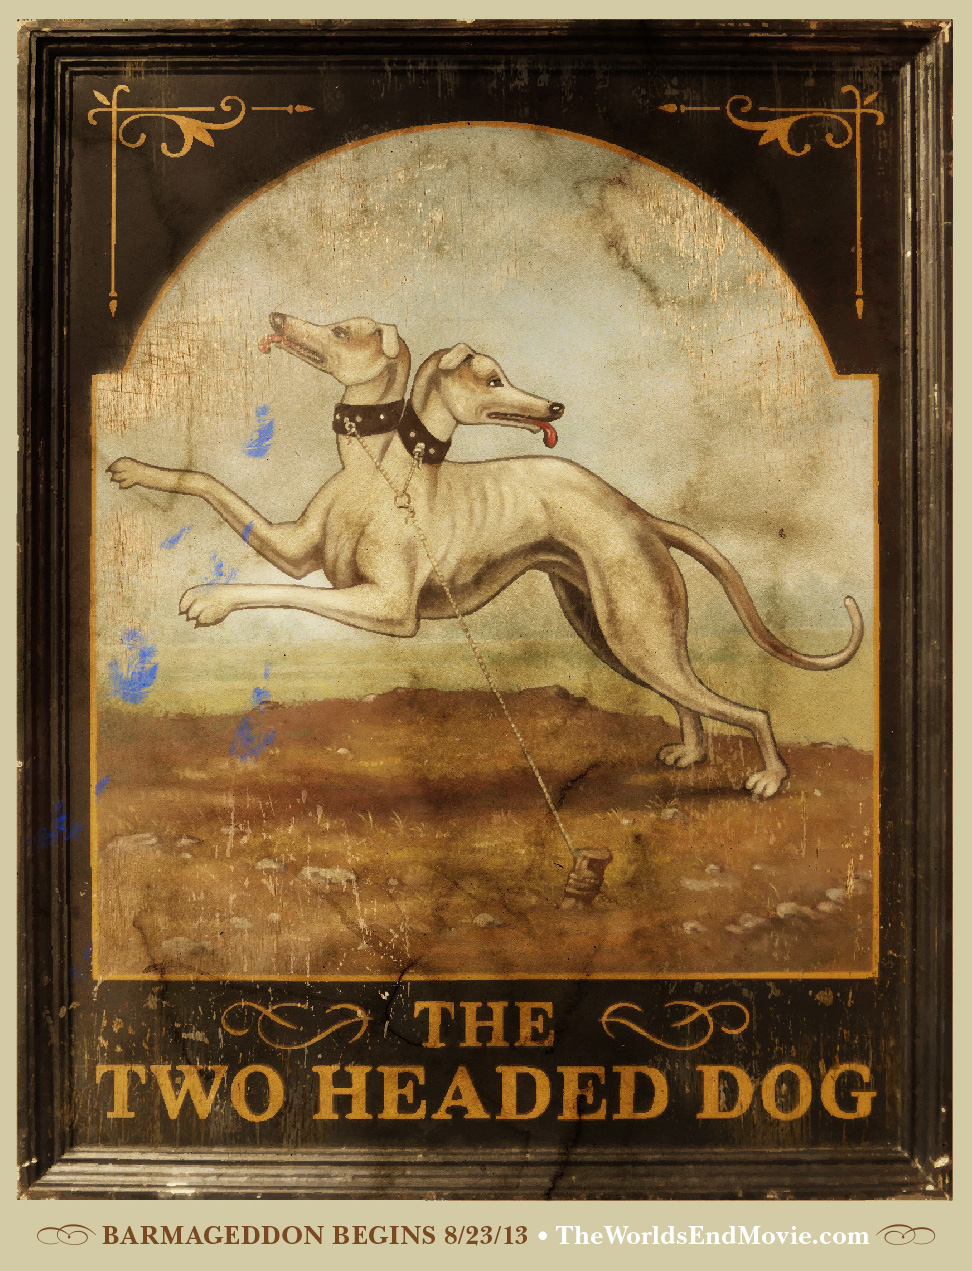 The Two Headed Dog